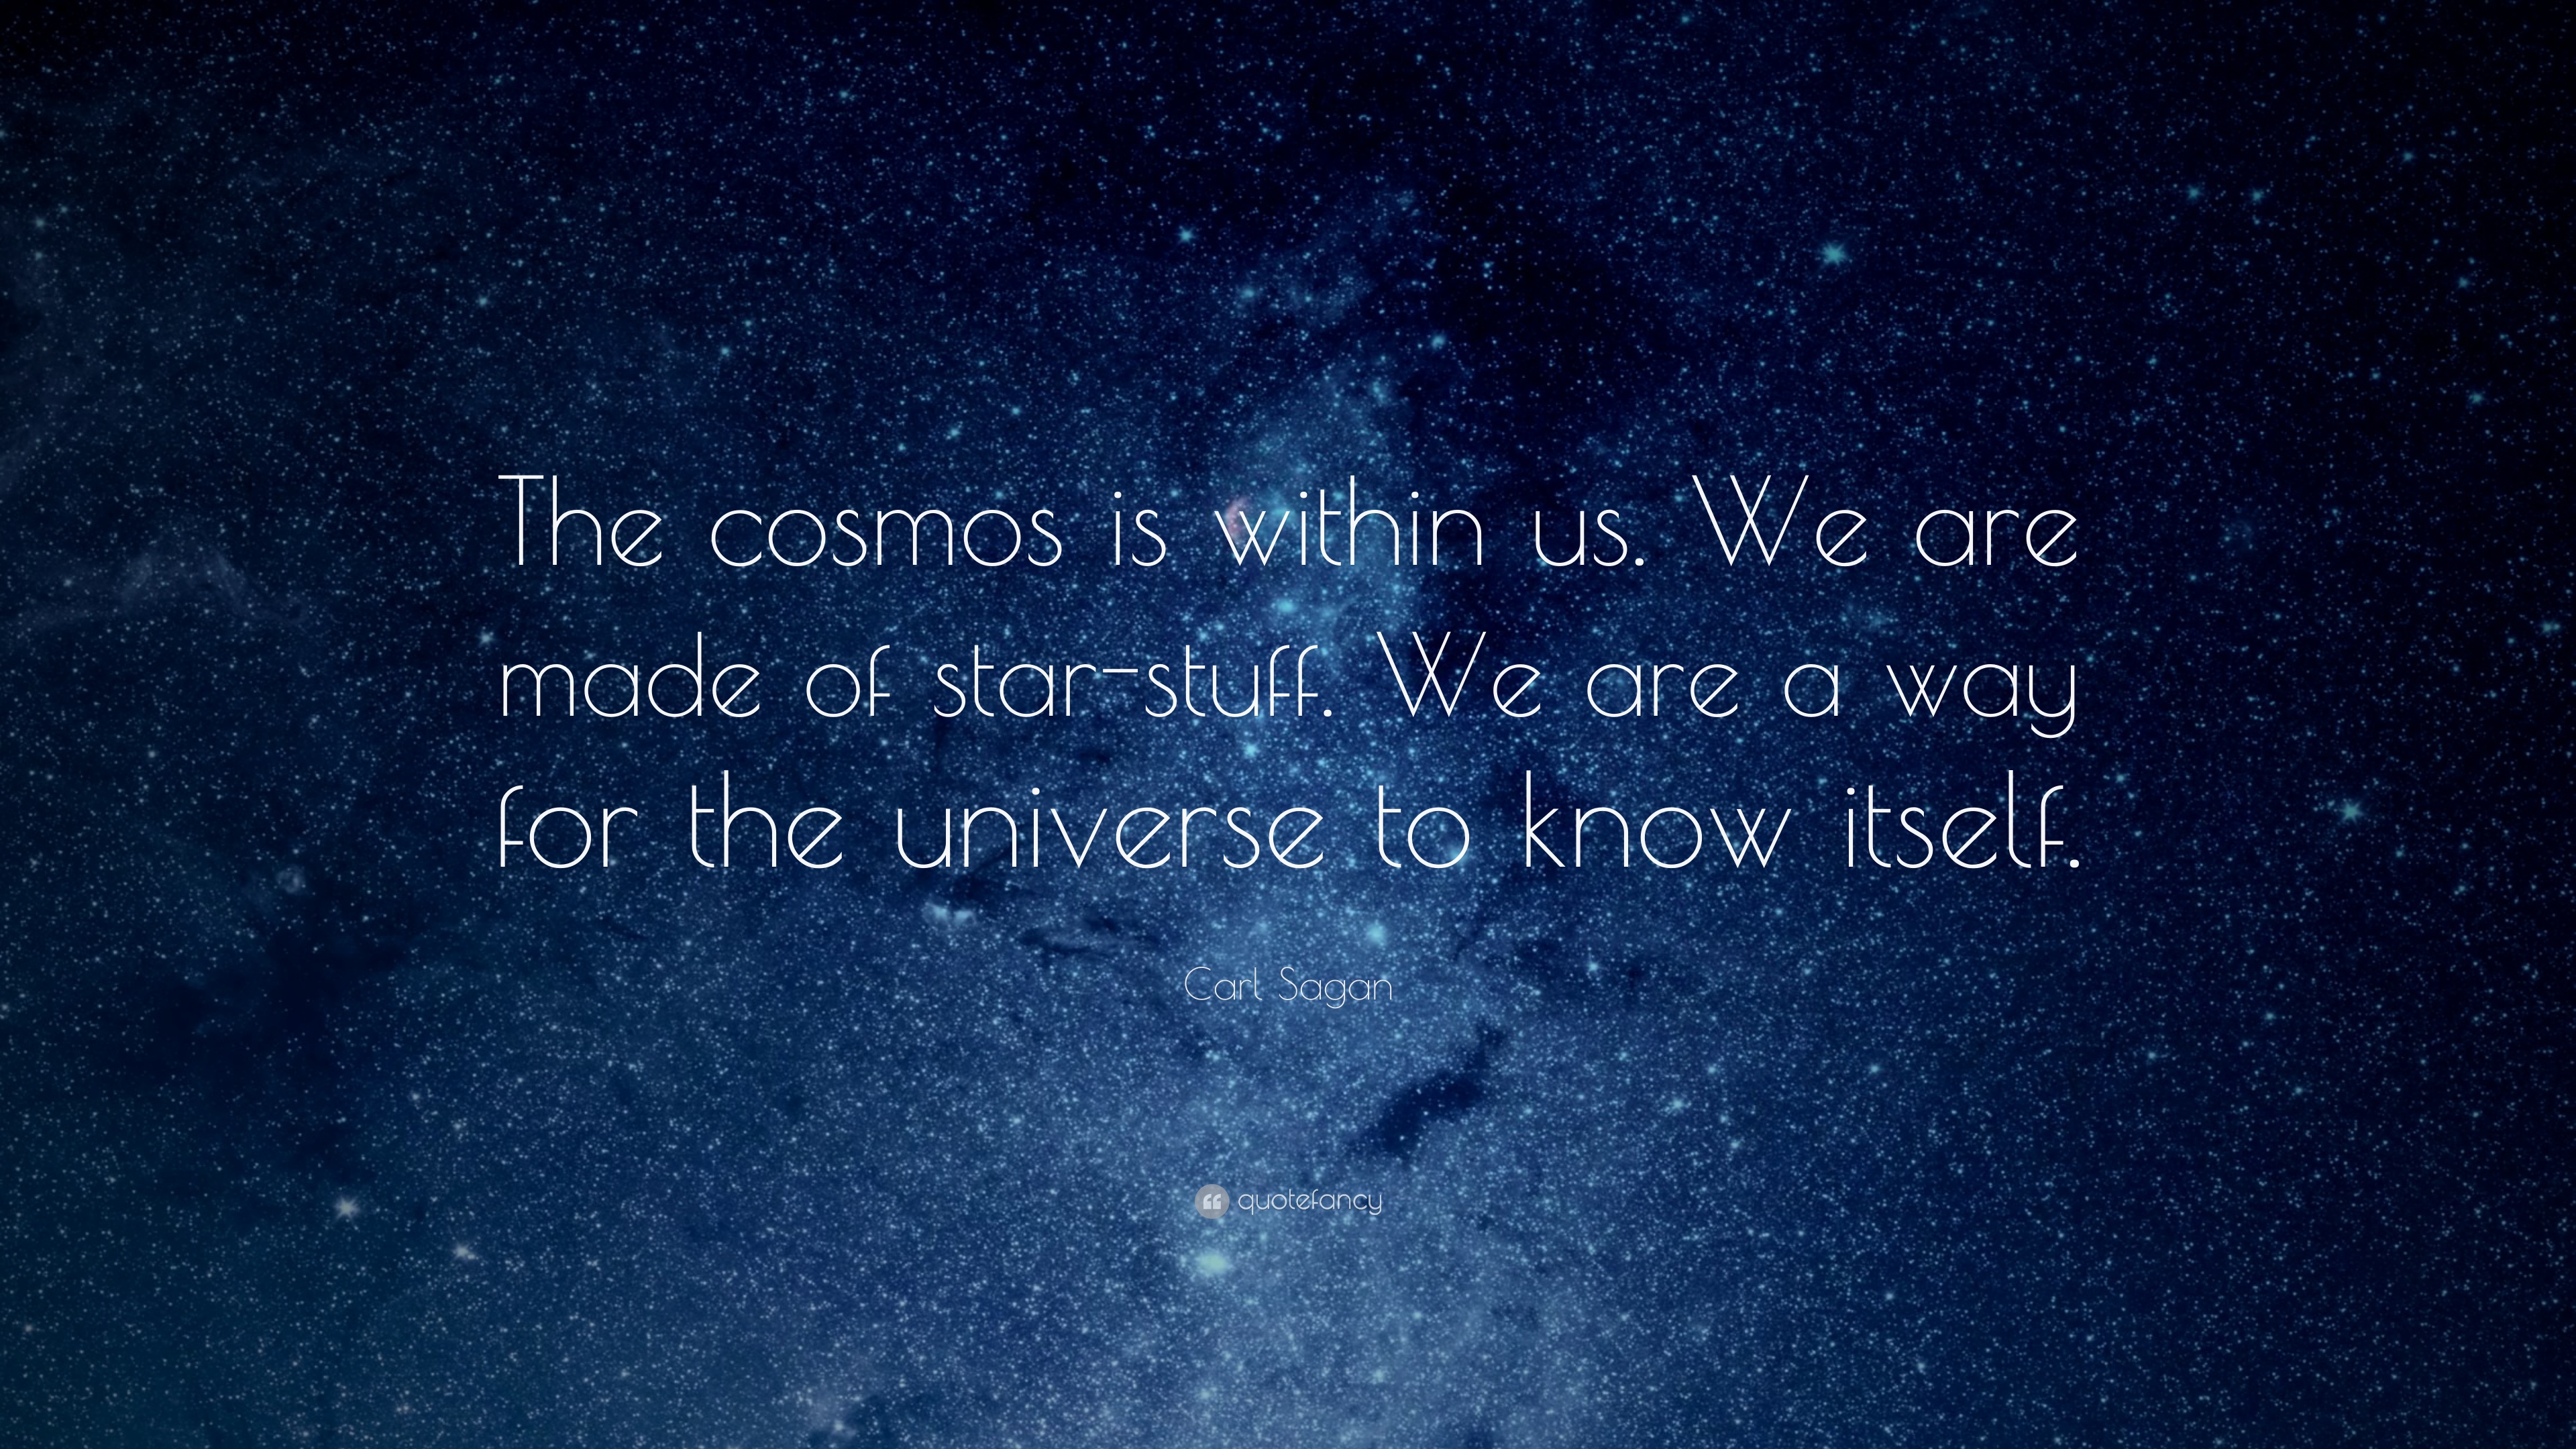 3365-Carl-Sagan-Quote-The-cosmos-is-within-us-We-are-made-of-star-stuff.jpg